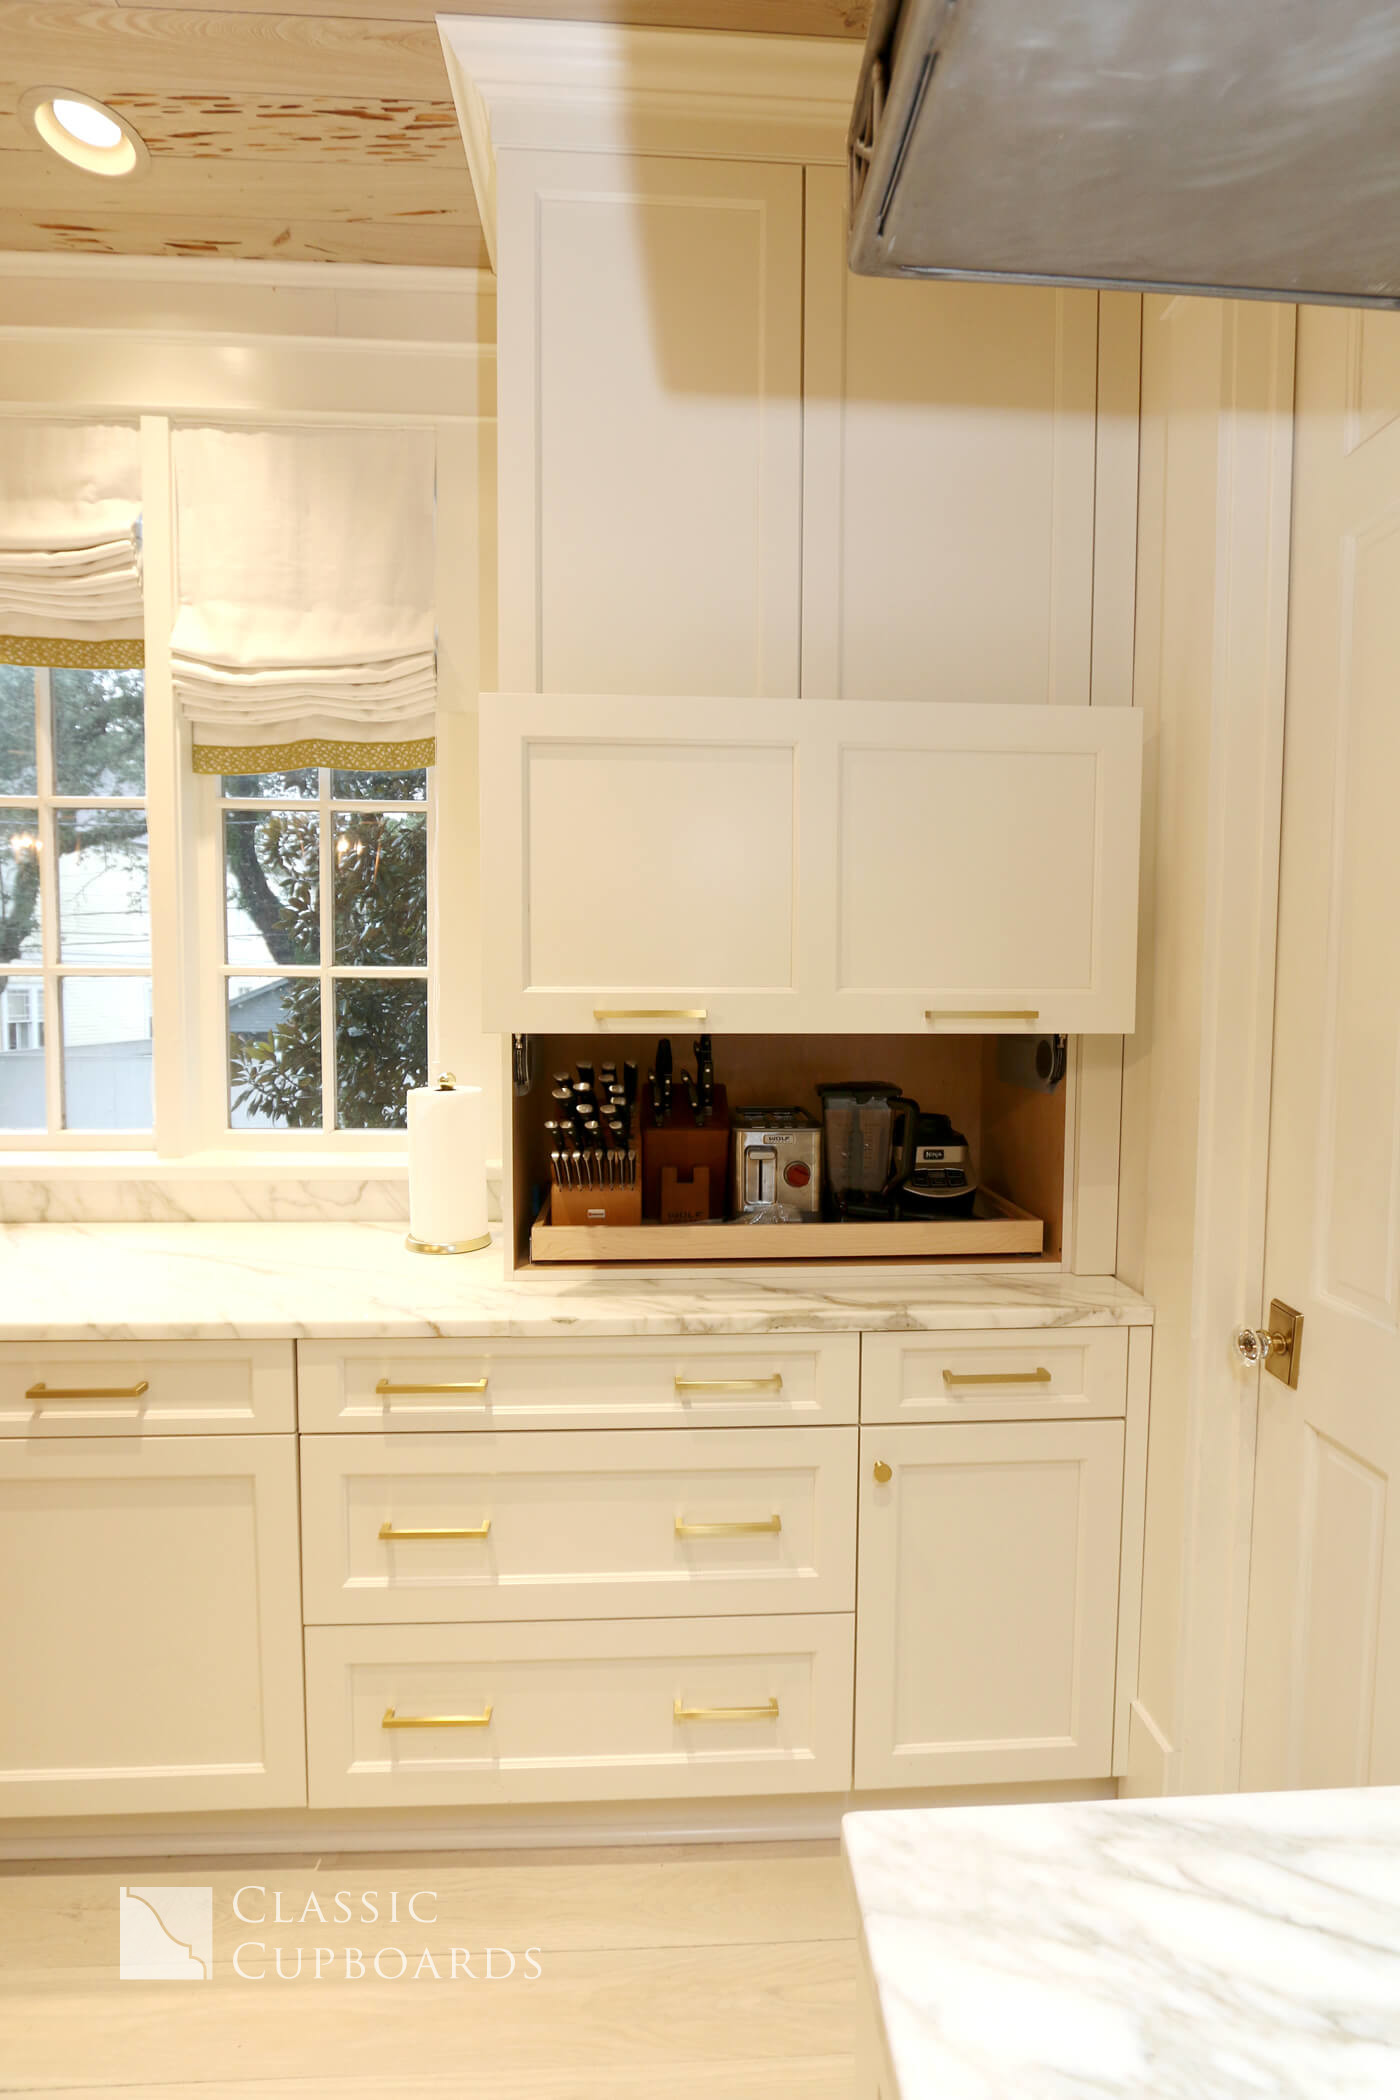 transitional style cabinets with hidden appliance corner